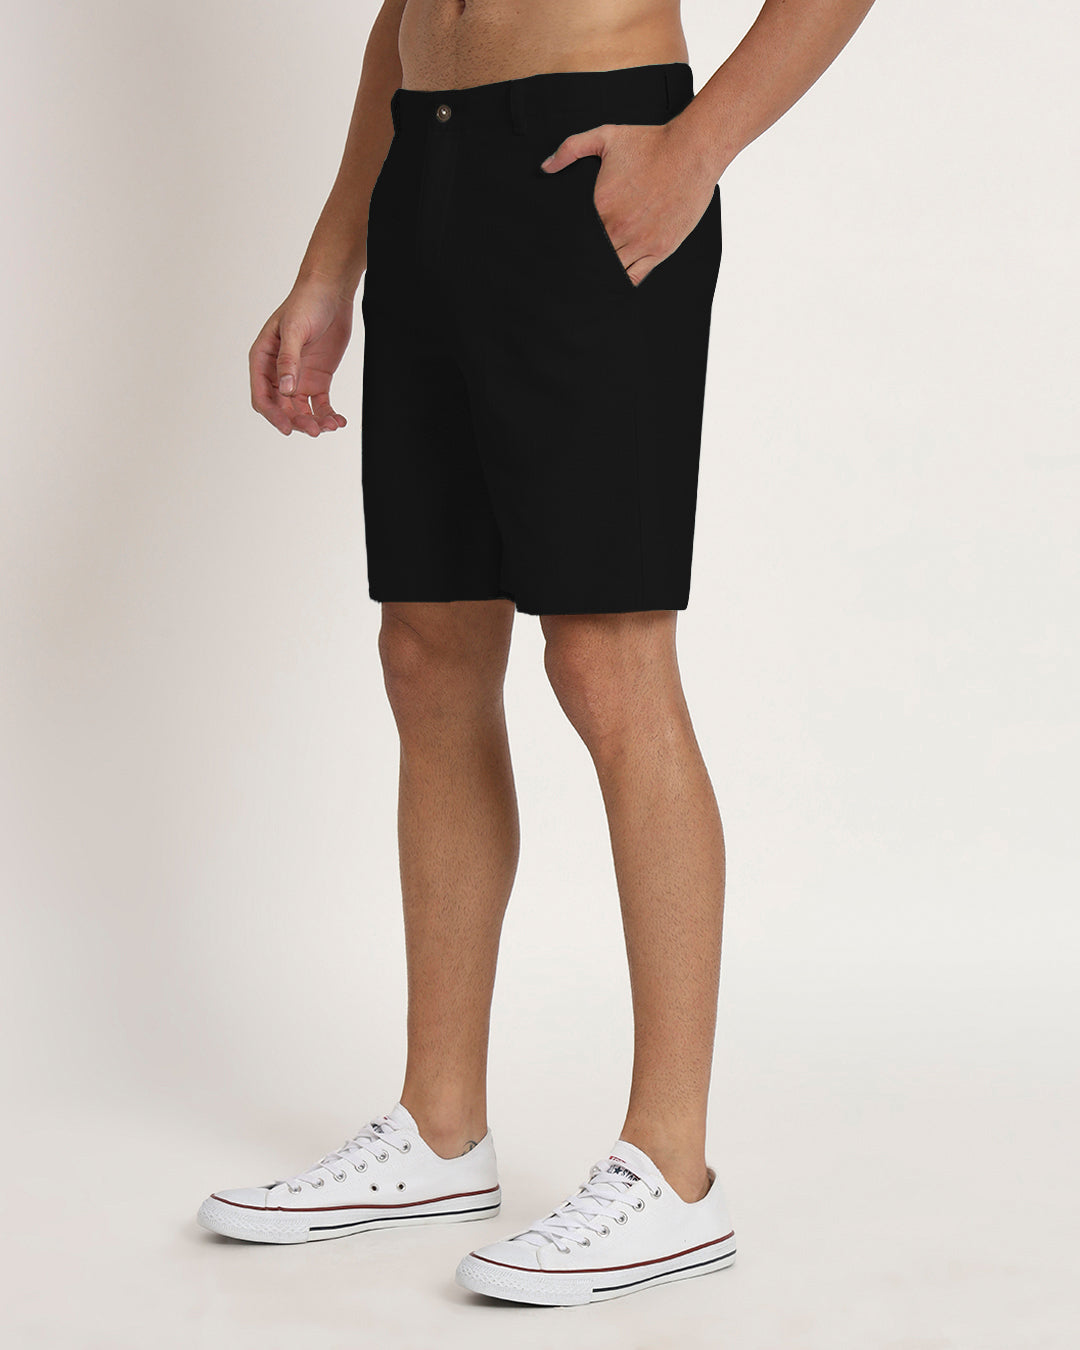 Combo : Ready For Anything Black & Grey Men's Shorts